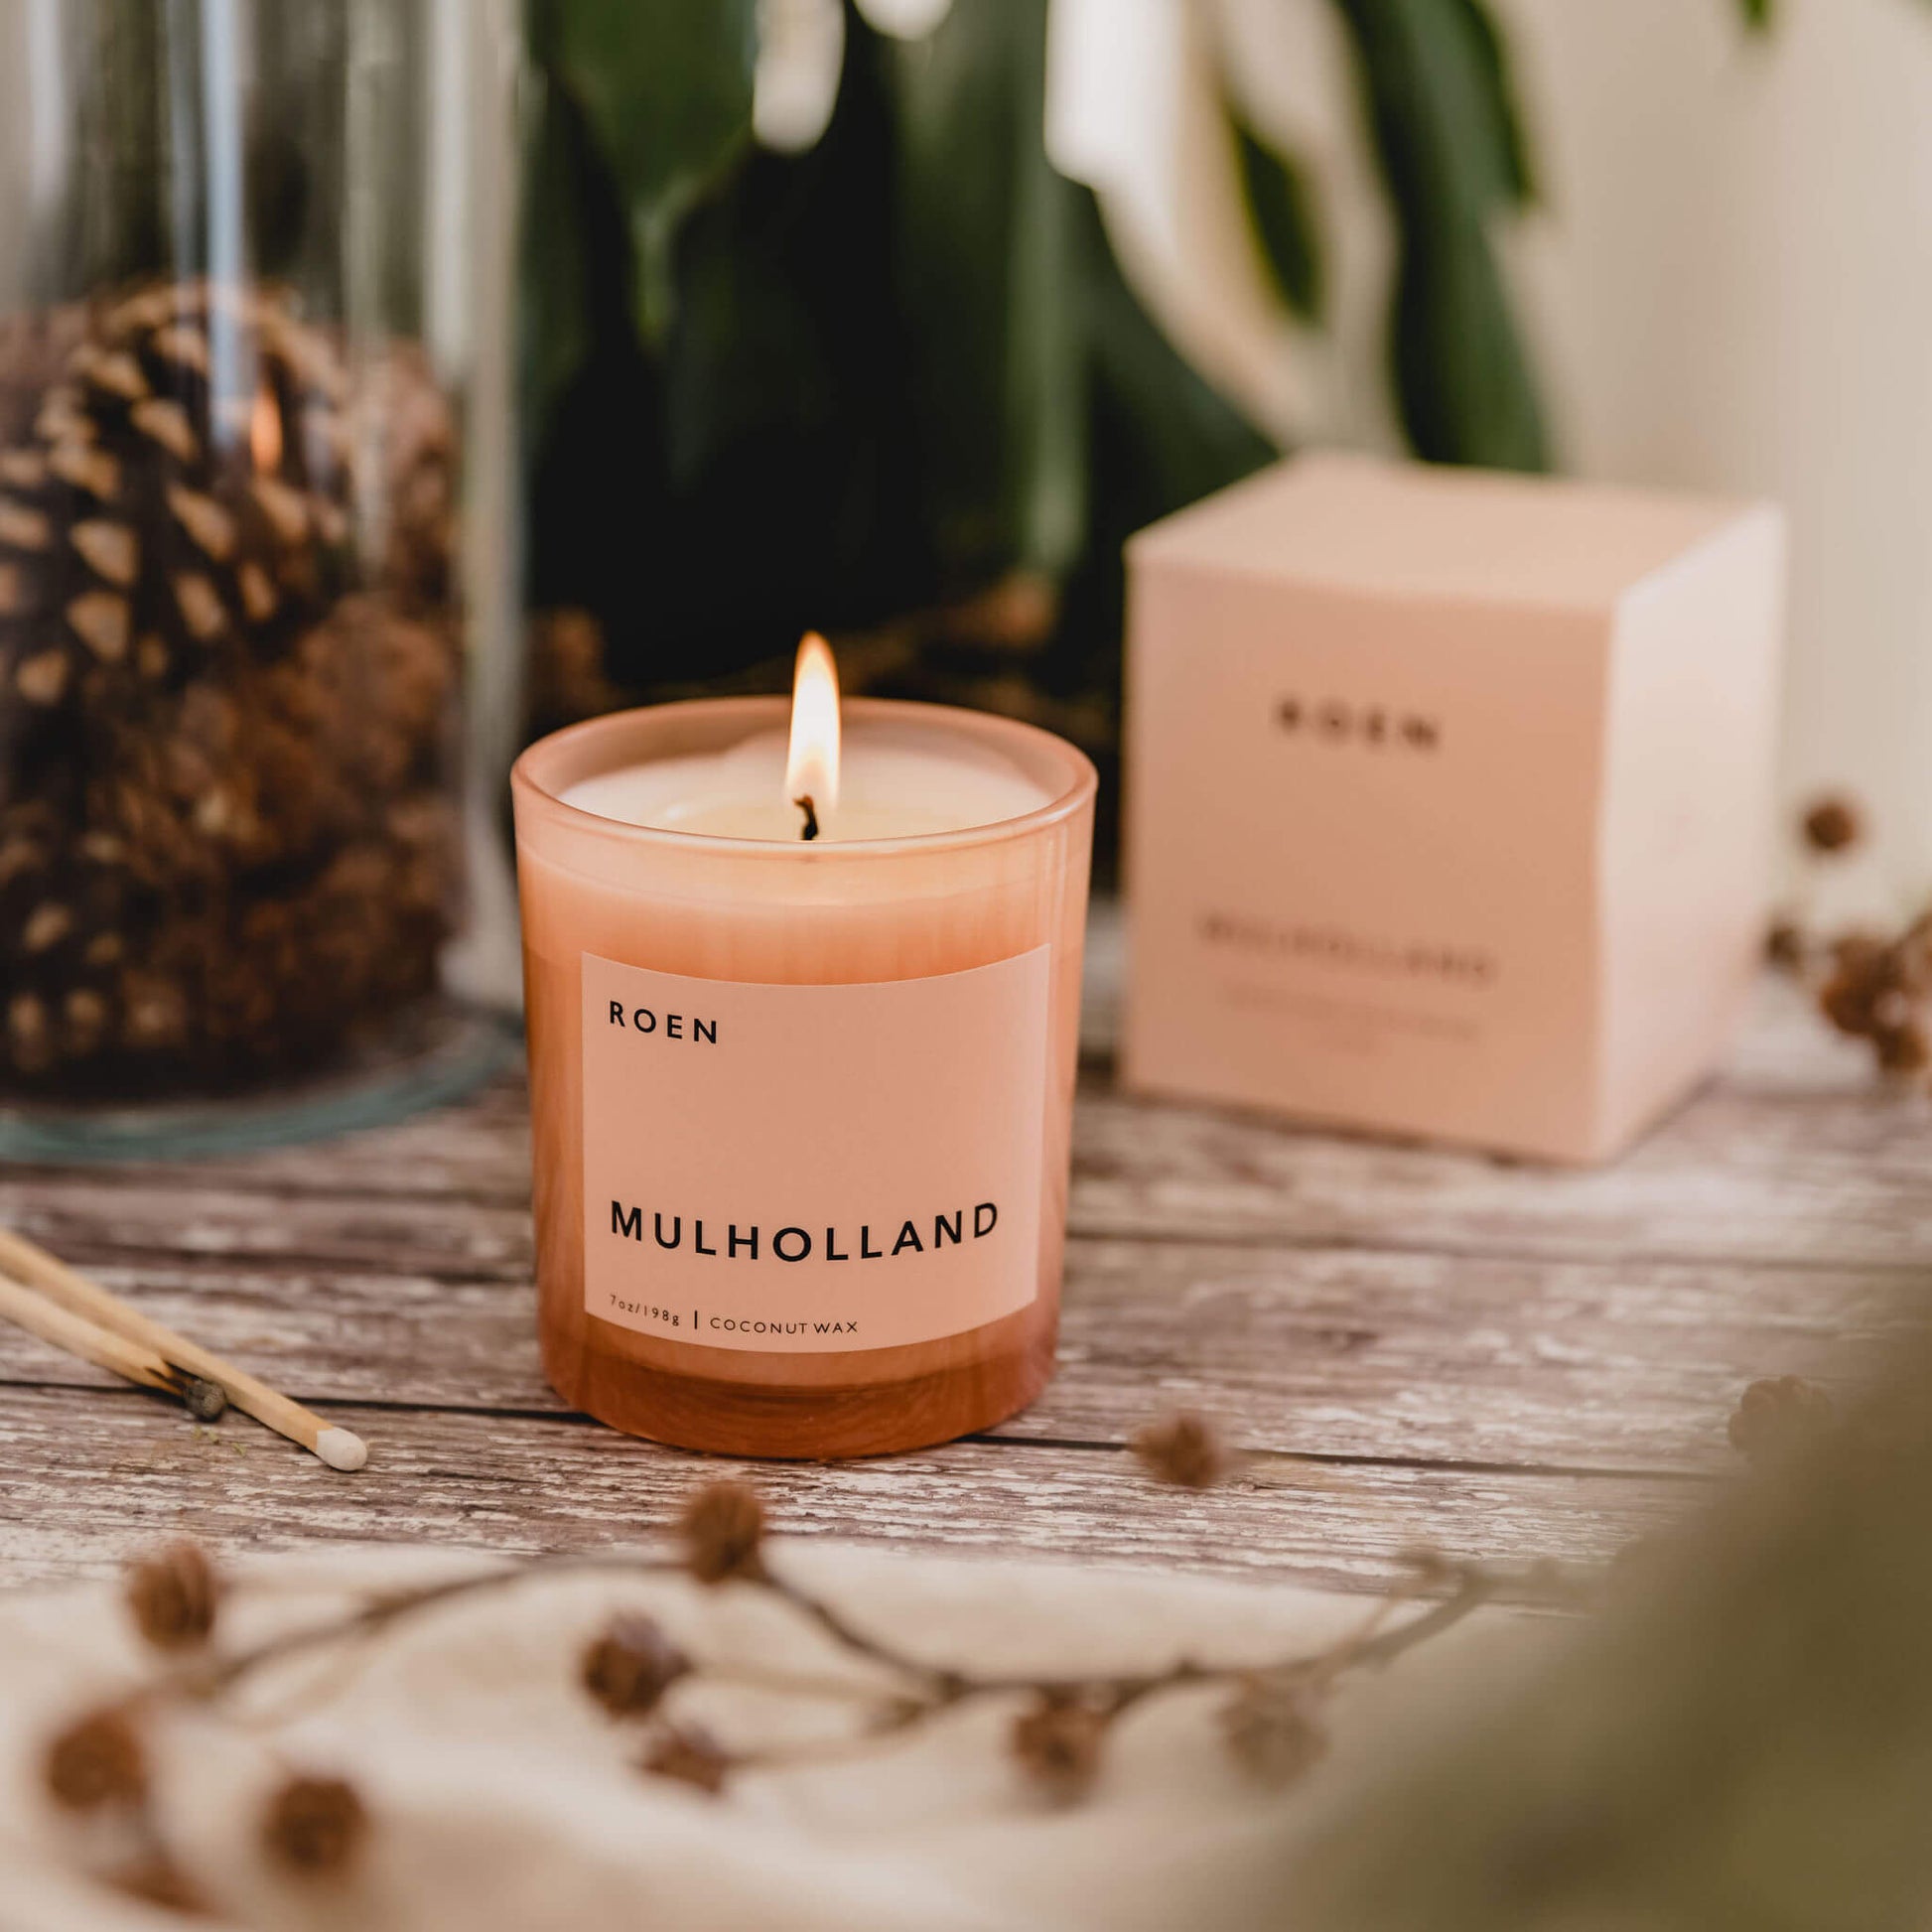 R O E N Mulholland Scented Candle - Osmology Scented Candles & Home Fragrance